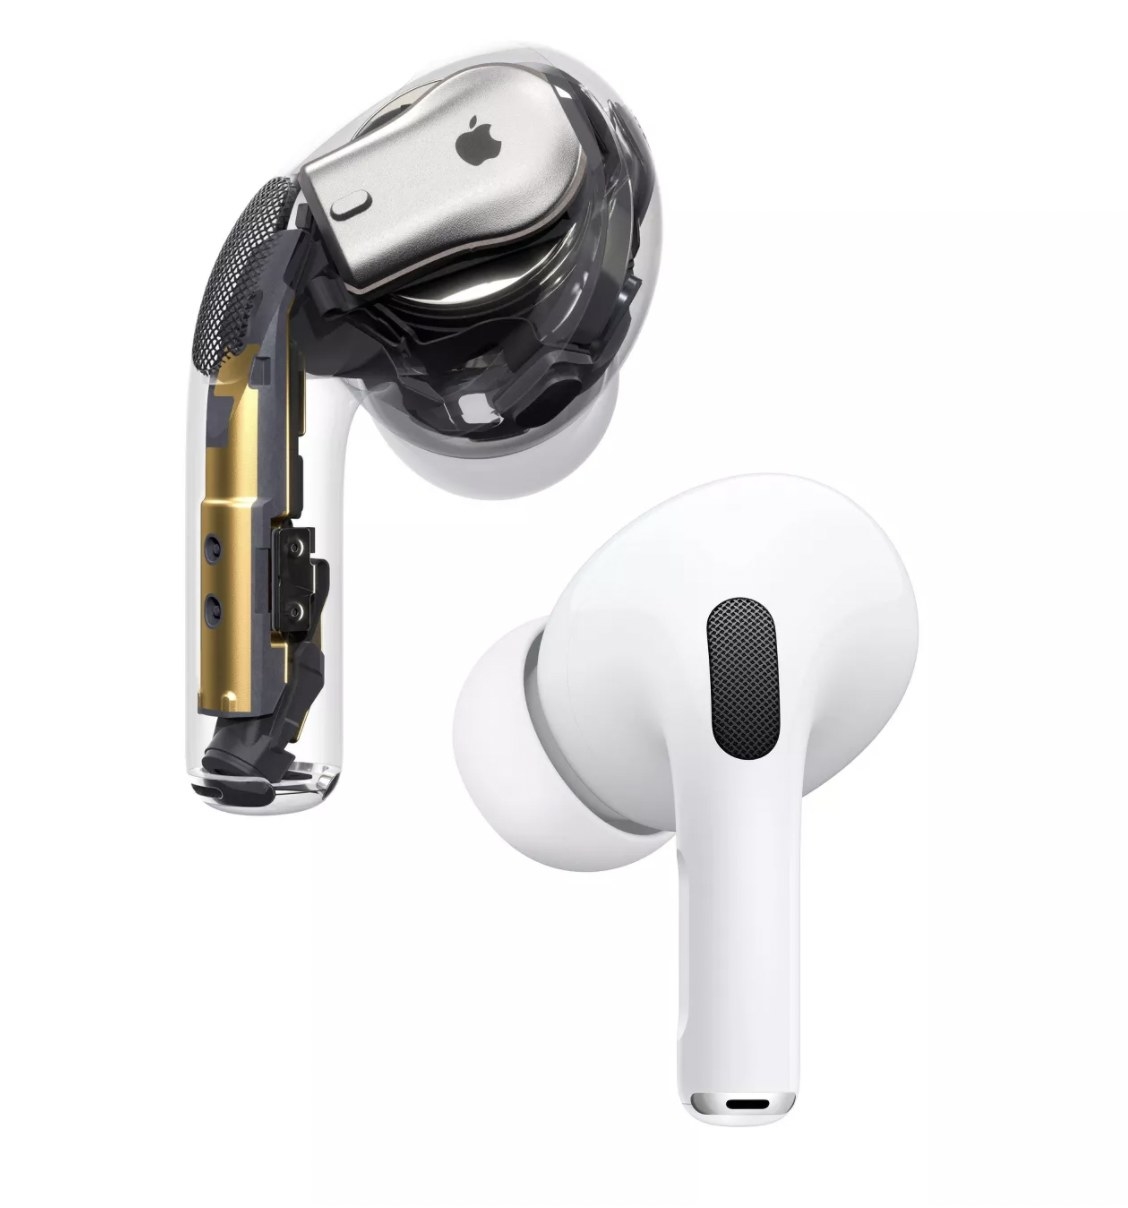 The pair of soft silicone-tipped earbuds with one shown via x-ray view to display the electronic pieces inside